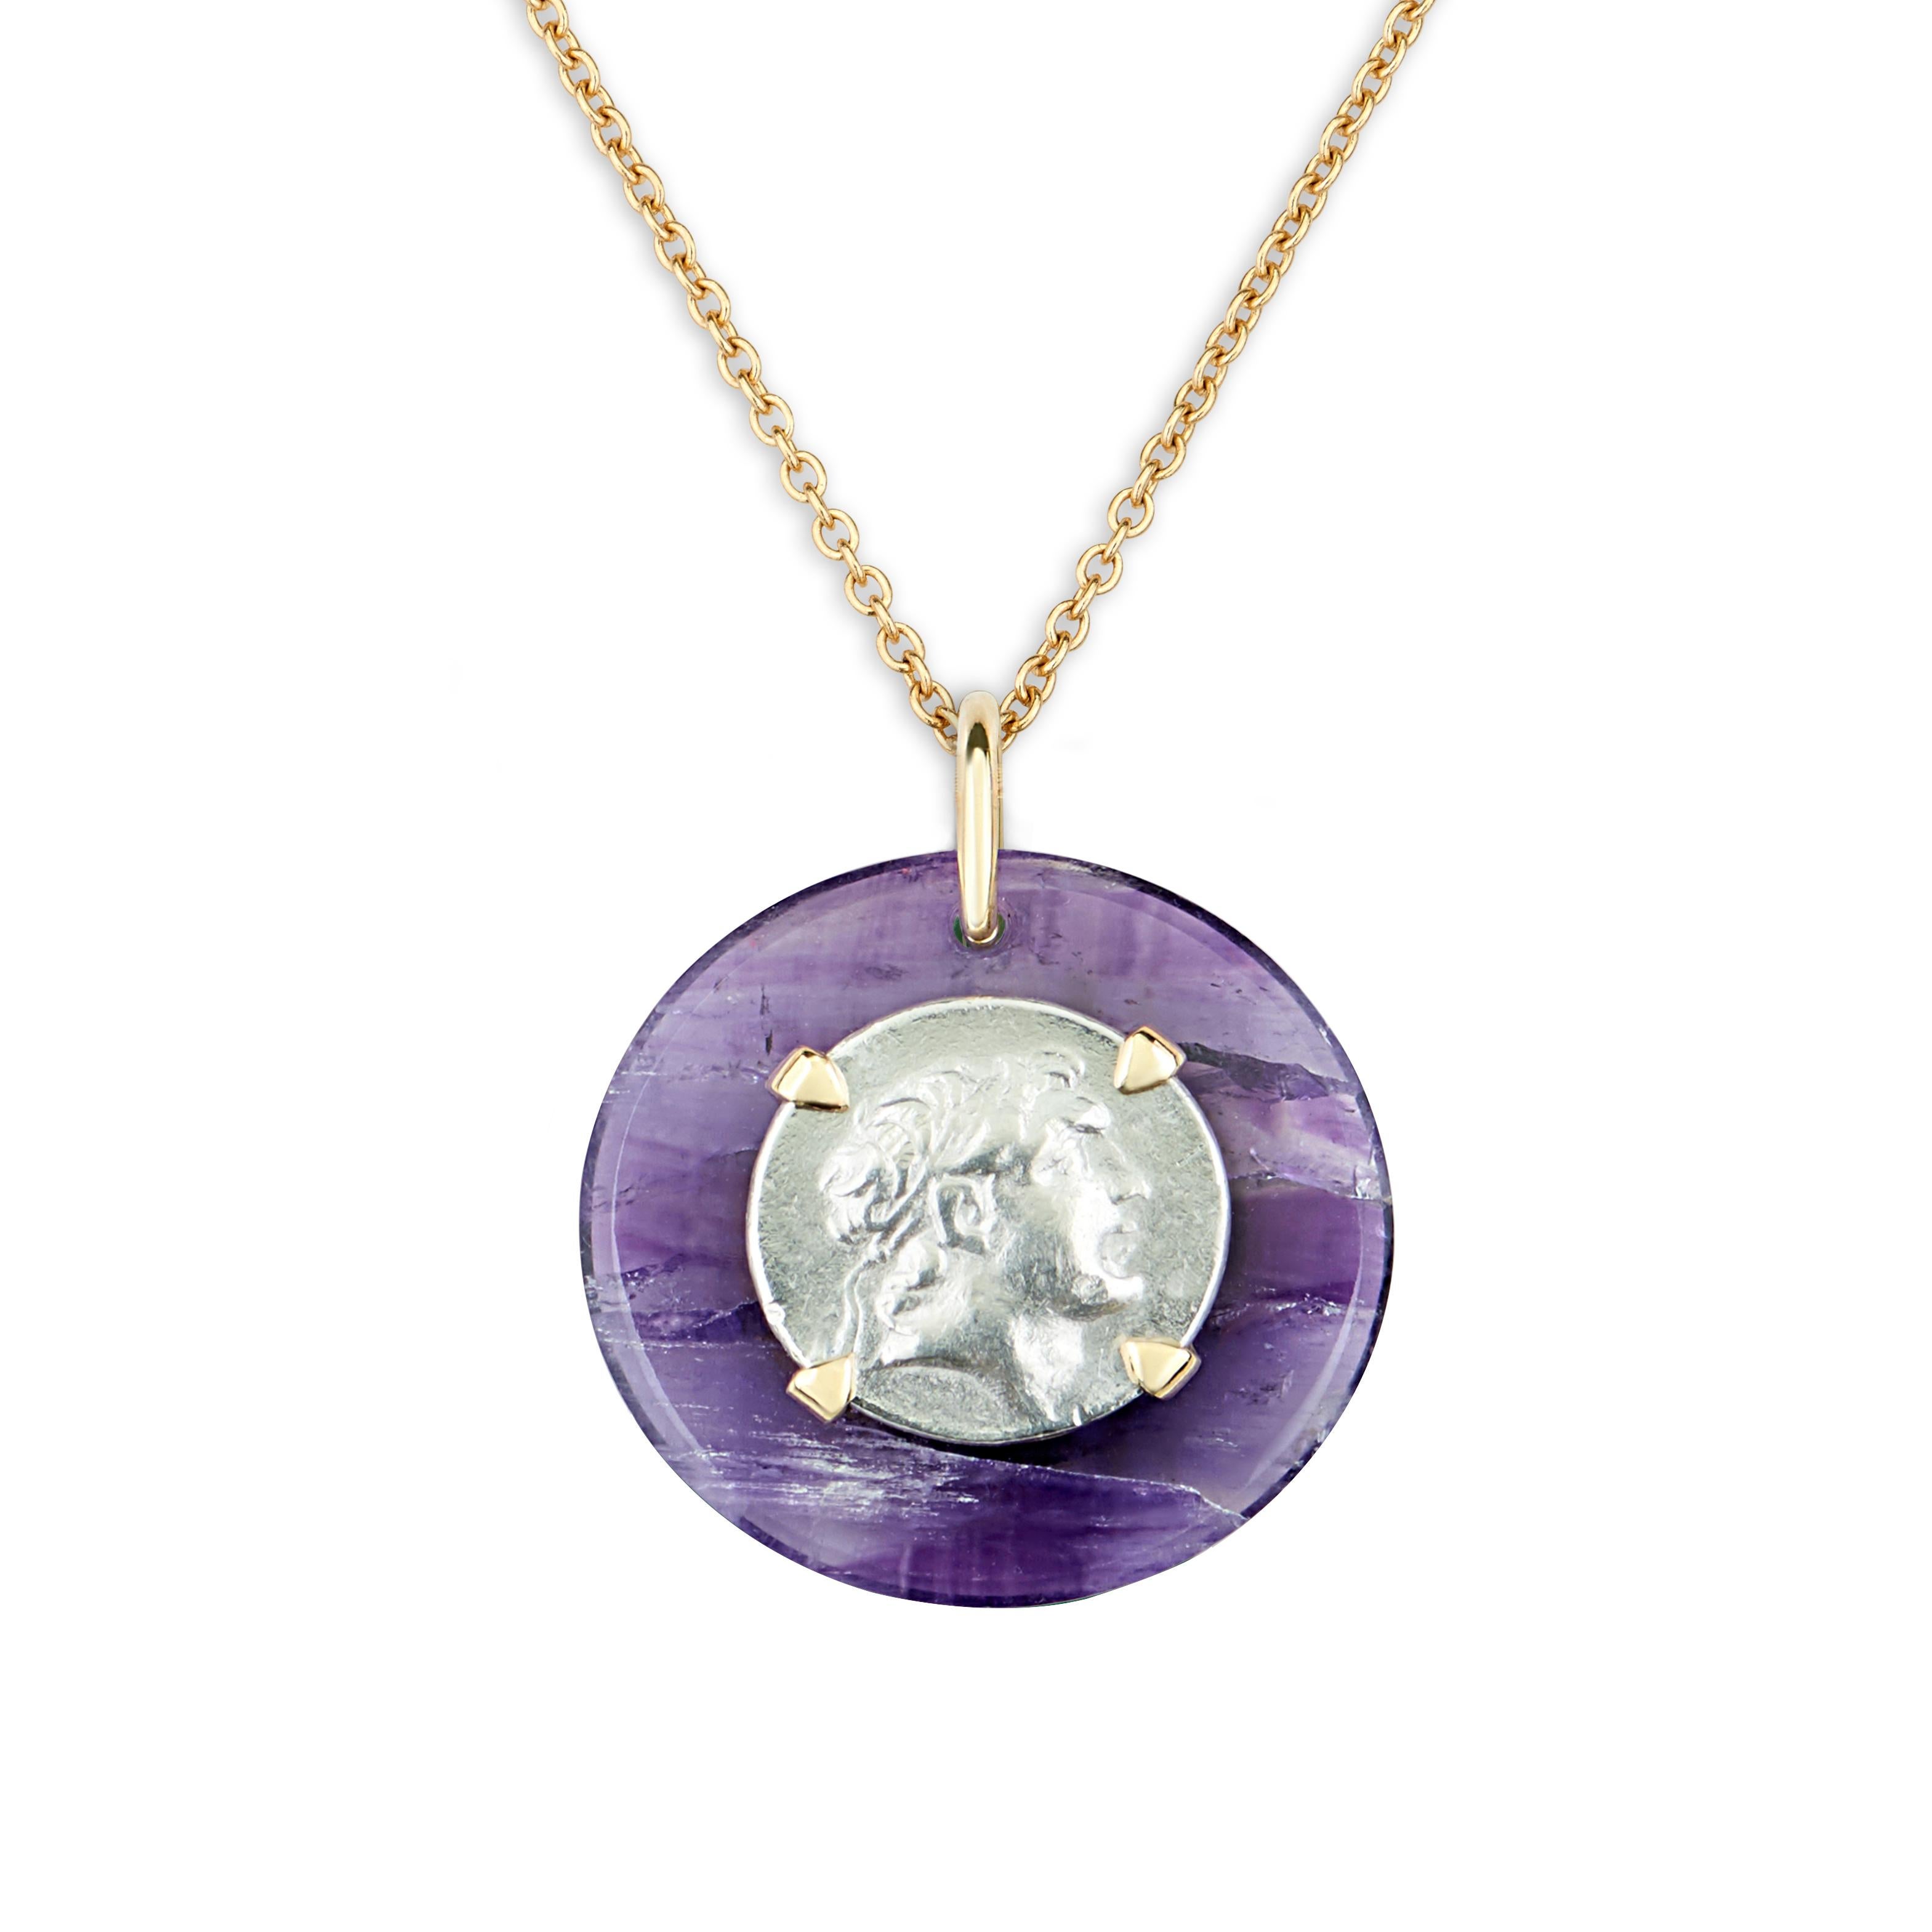 This DUBINI coin necklace from the 'Empires' collection features an authentic Ariarthes IX Eusebes Philopator (101-87 B.C.) silver coin set in 18K gold with amethyst disc.

Disc Ø 3cm

The medallion is also available with a long chain (75cm), medium